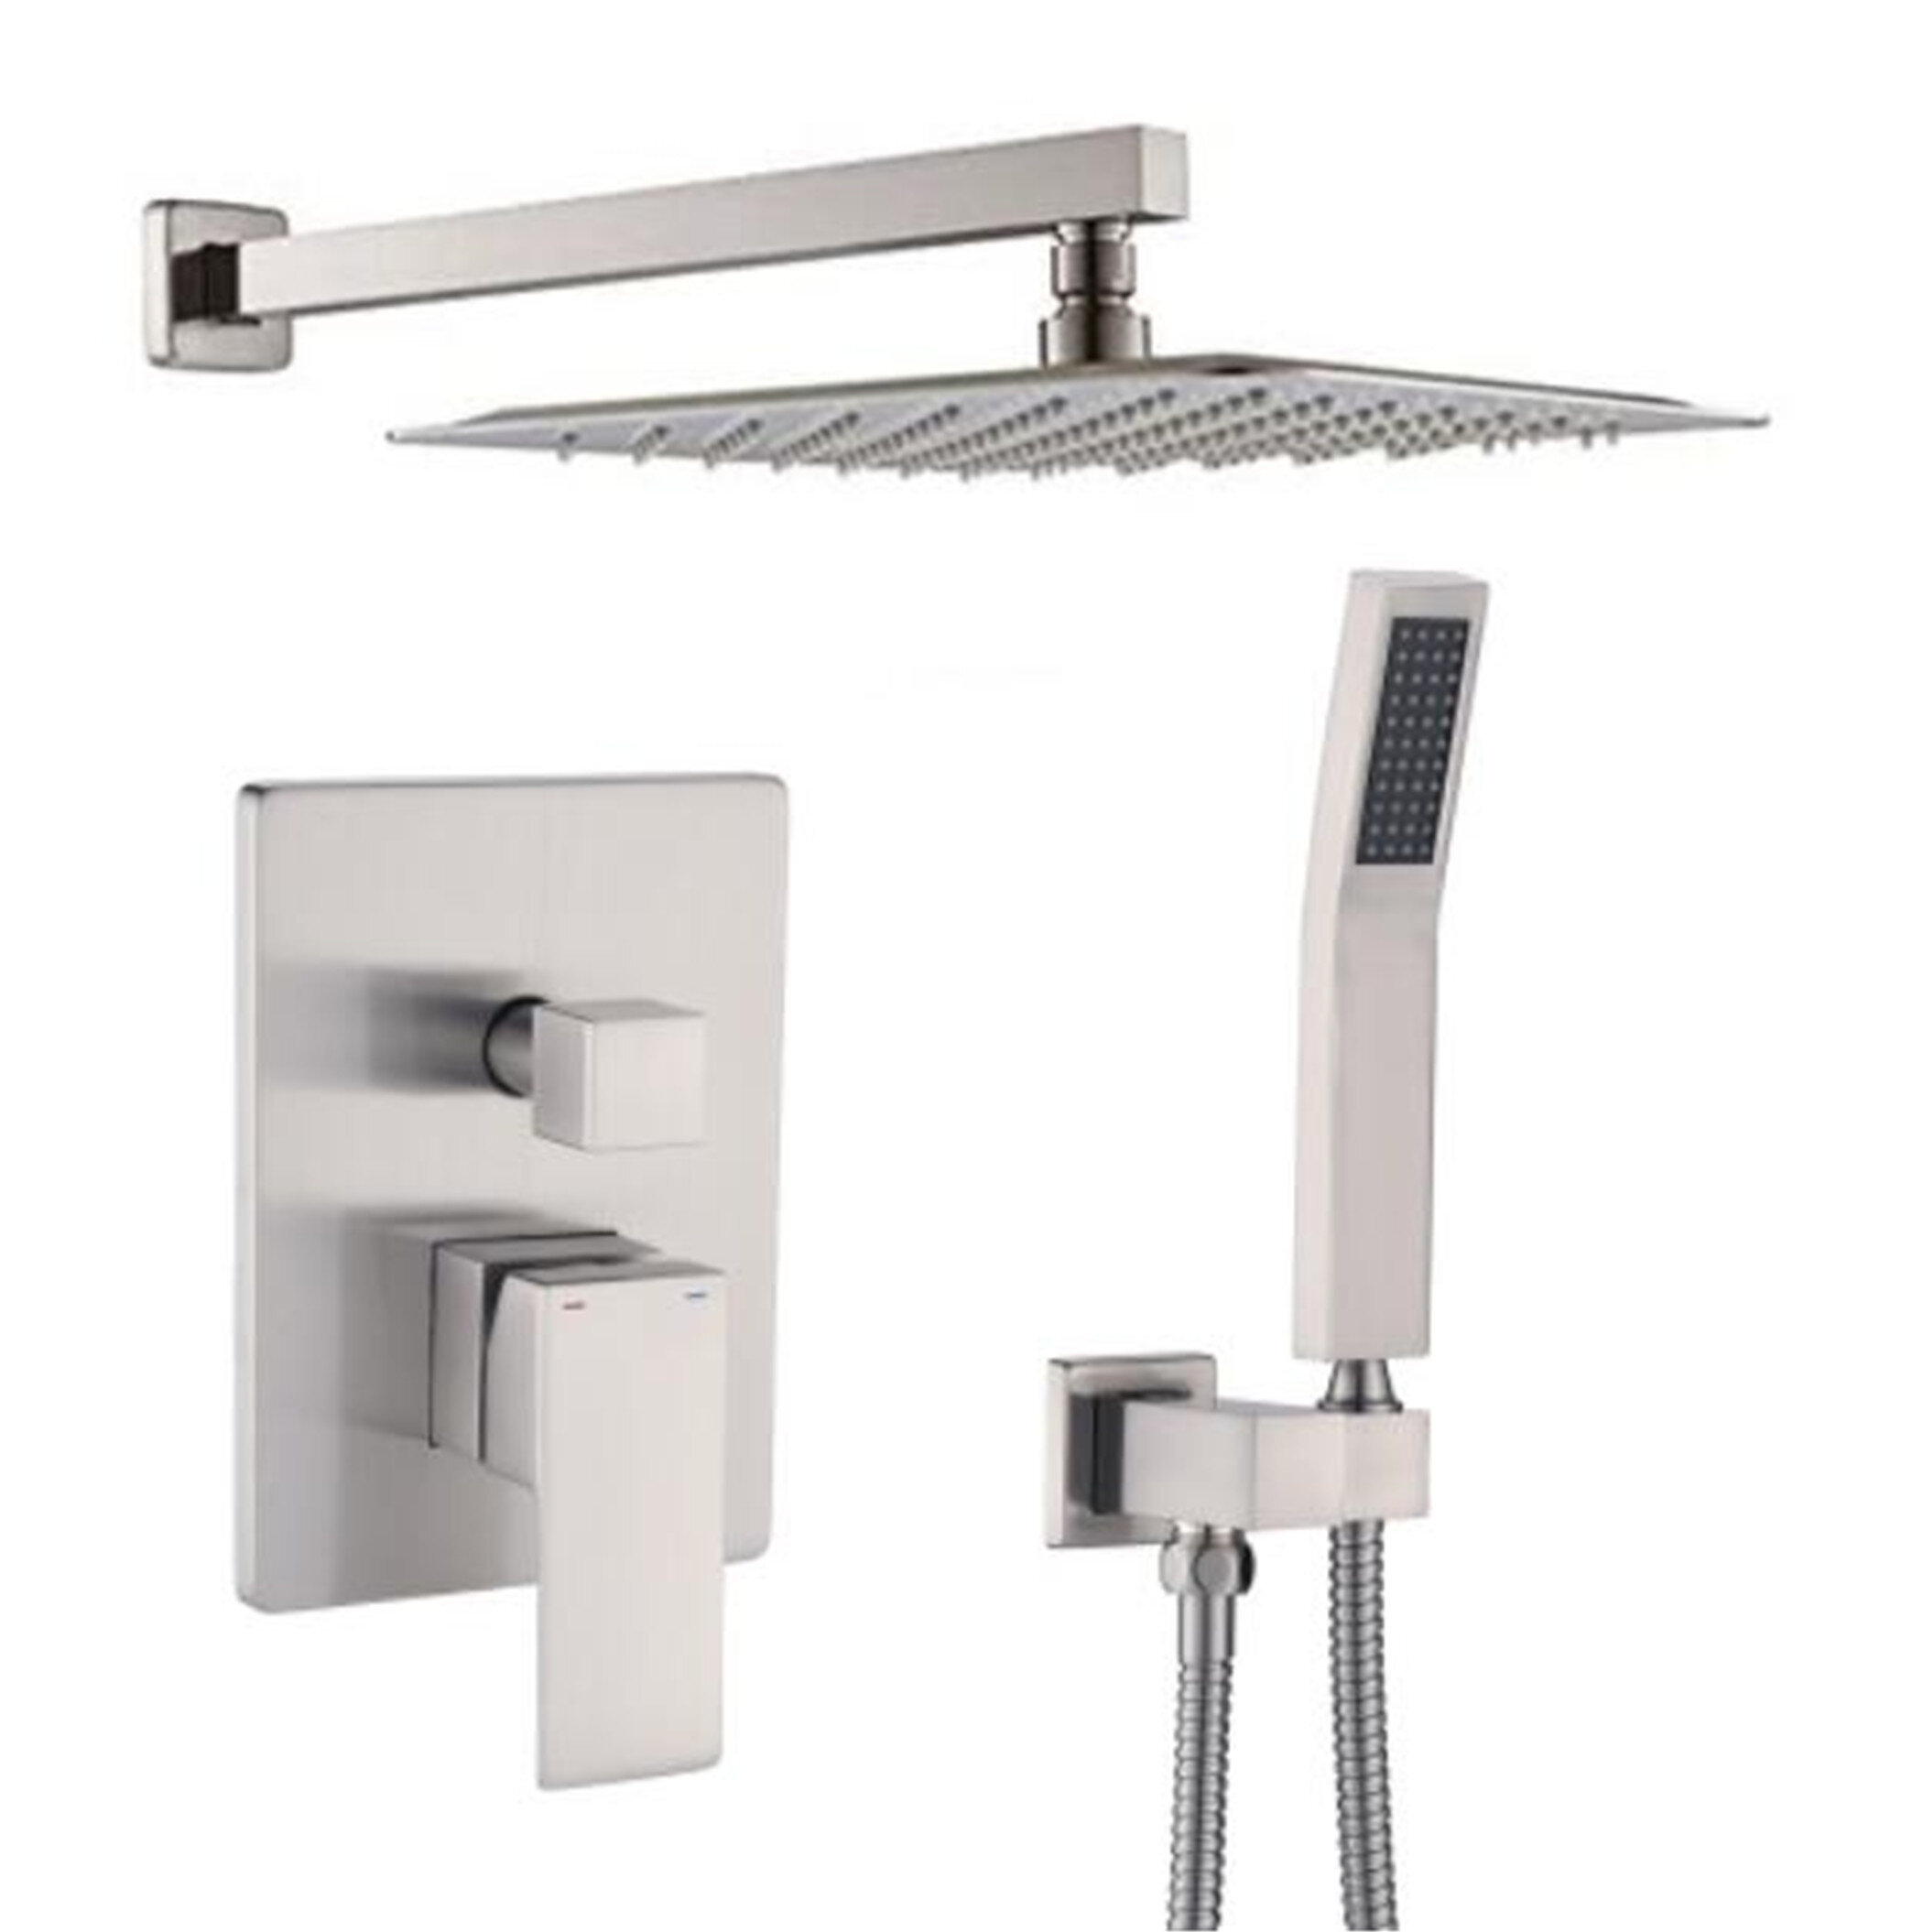 12 inch LED Rainfall Shower Faucet System Brushed Nickel with Hand Shower Mixer